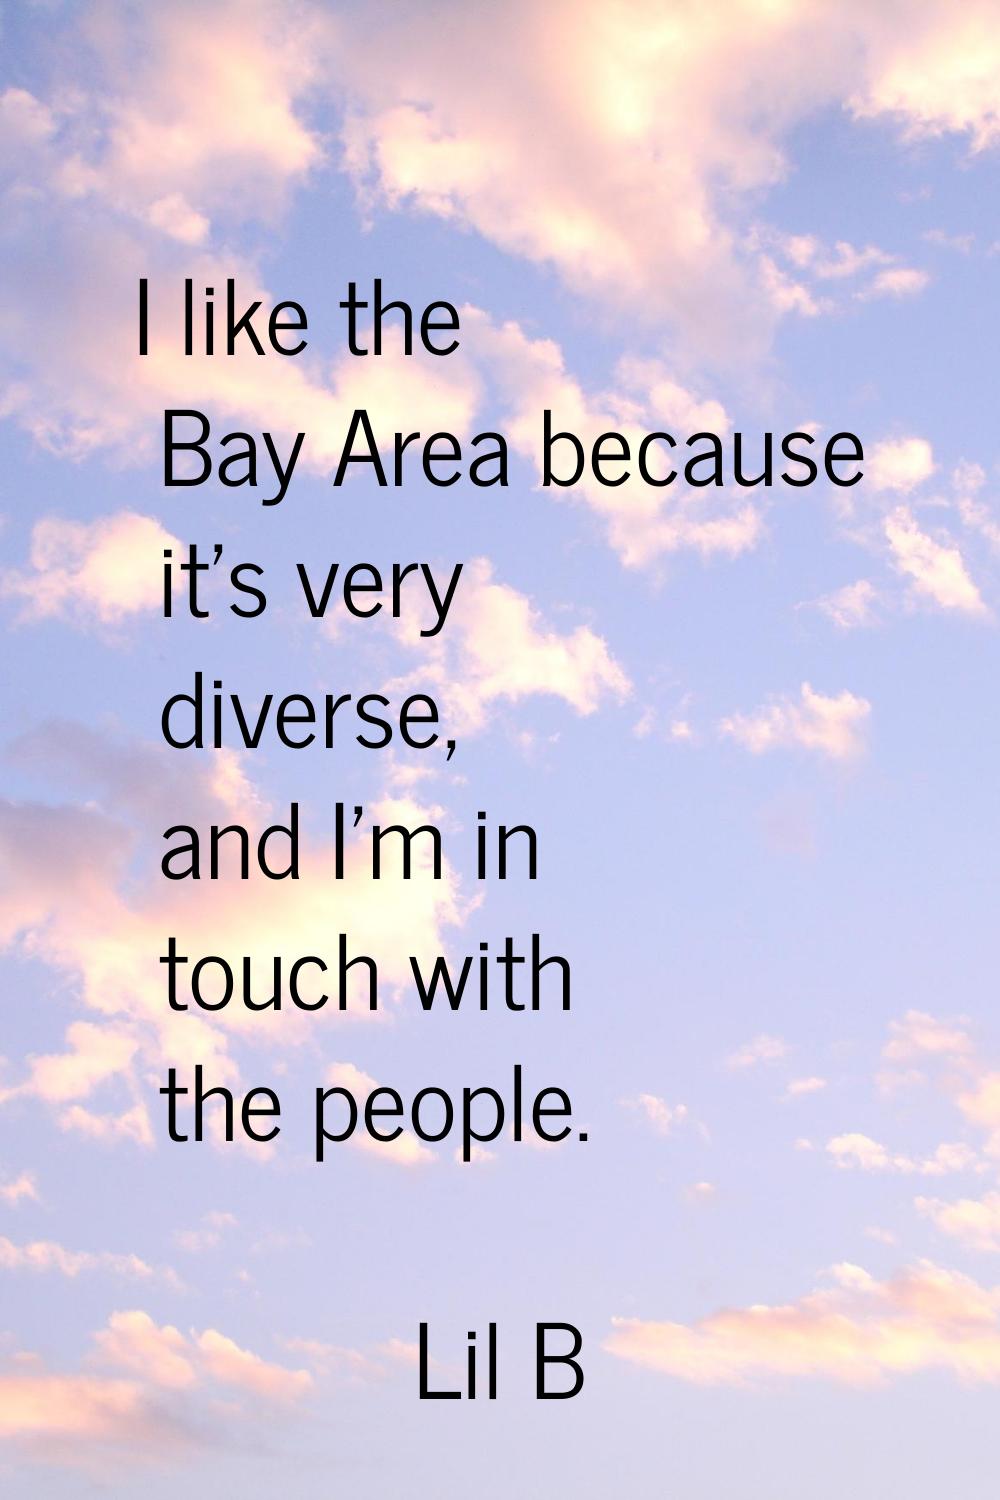 I like the Bay Area because it's very diverse, and I'm in touch with the people.